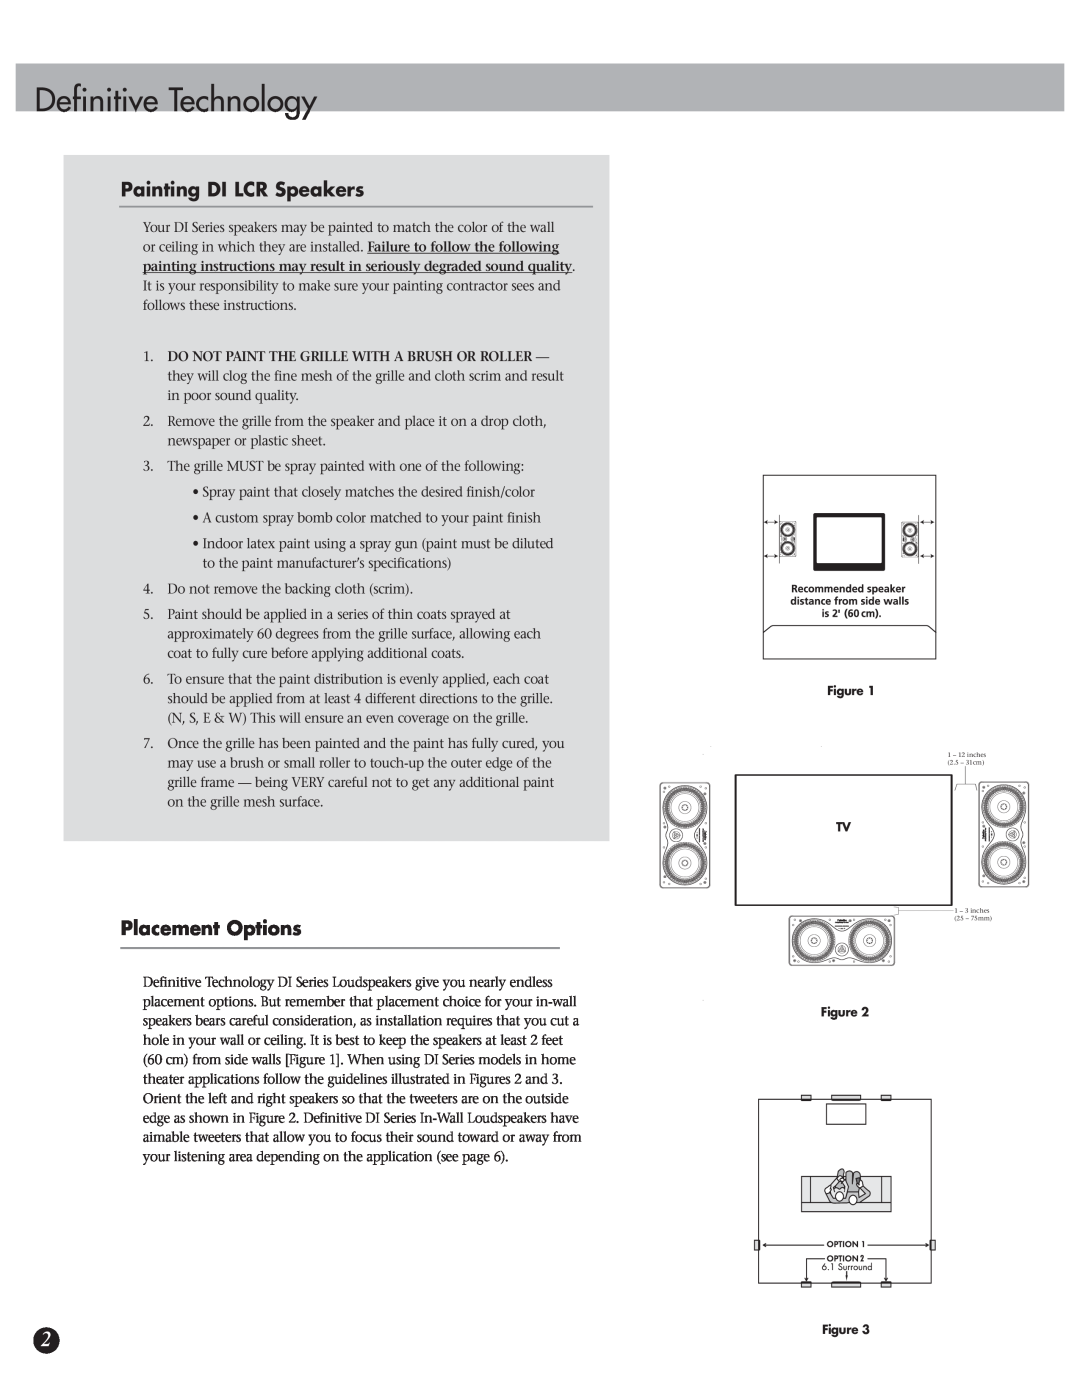 Definitive Technology 6.5LCR owner manual Painting DI LCR Speakers, Placement Options, Definitive Technology 